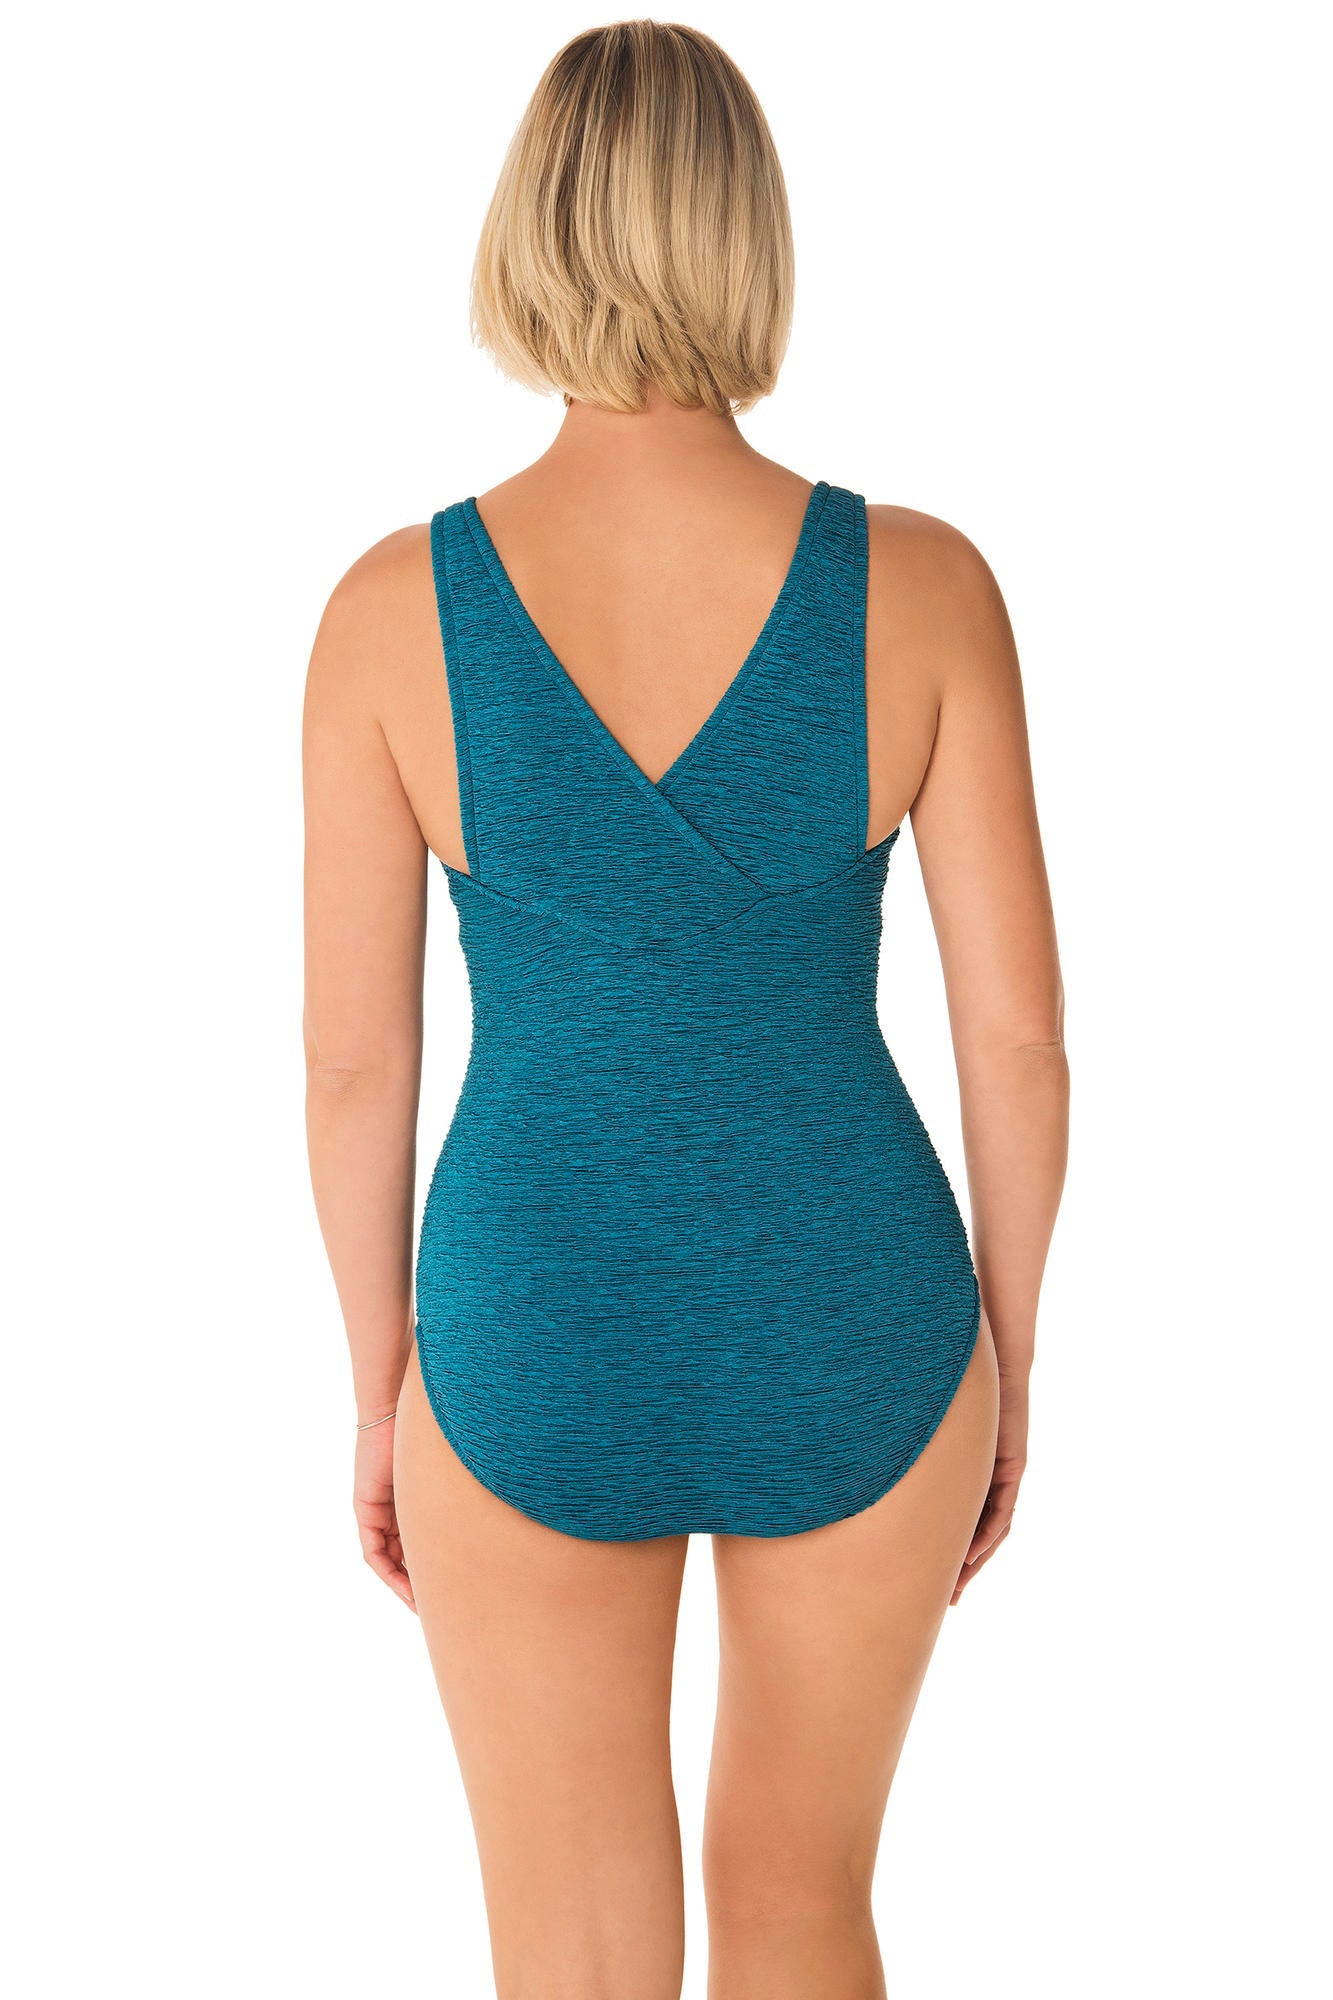 Penbrooke Women's Krinkle Chlorine Resistant High Neck One Piece Swimsuit  at